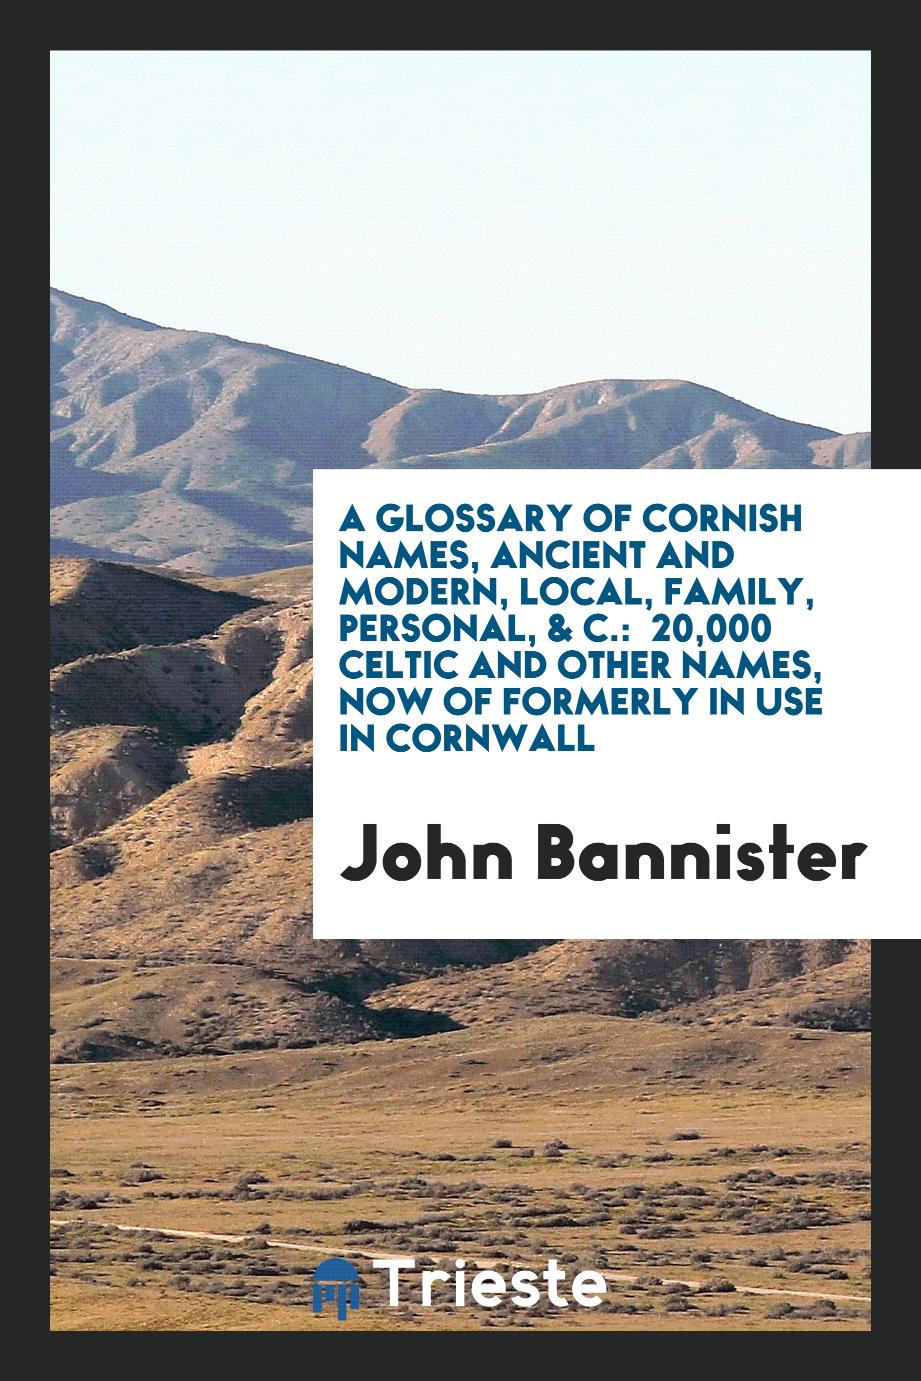 A Glossary of Cornish Names, Ancient and Modern, Local, Family, Personal, & C.: 20,000 Celtic and Other Names, Now of Formerly in Use in Cornwall